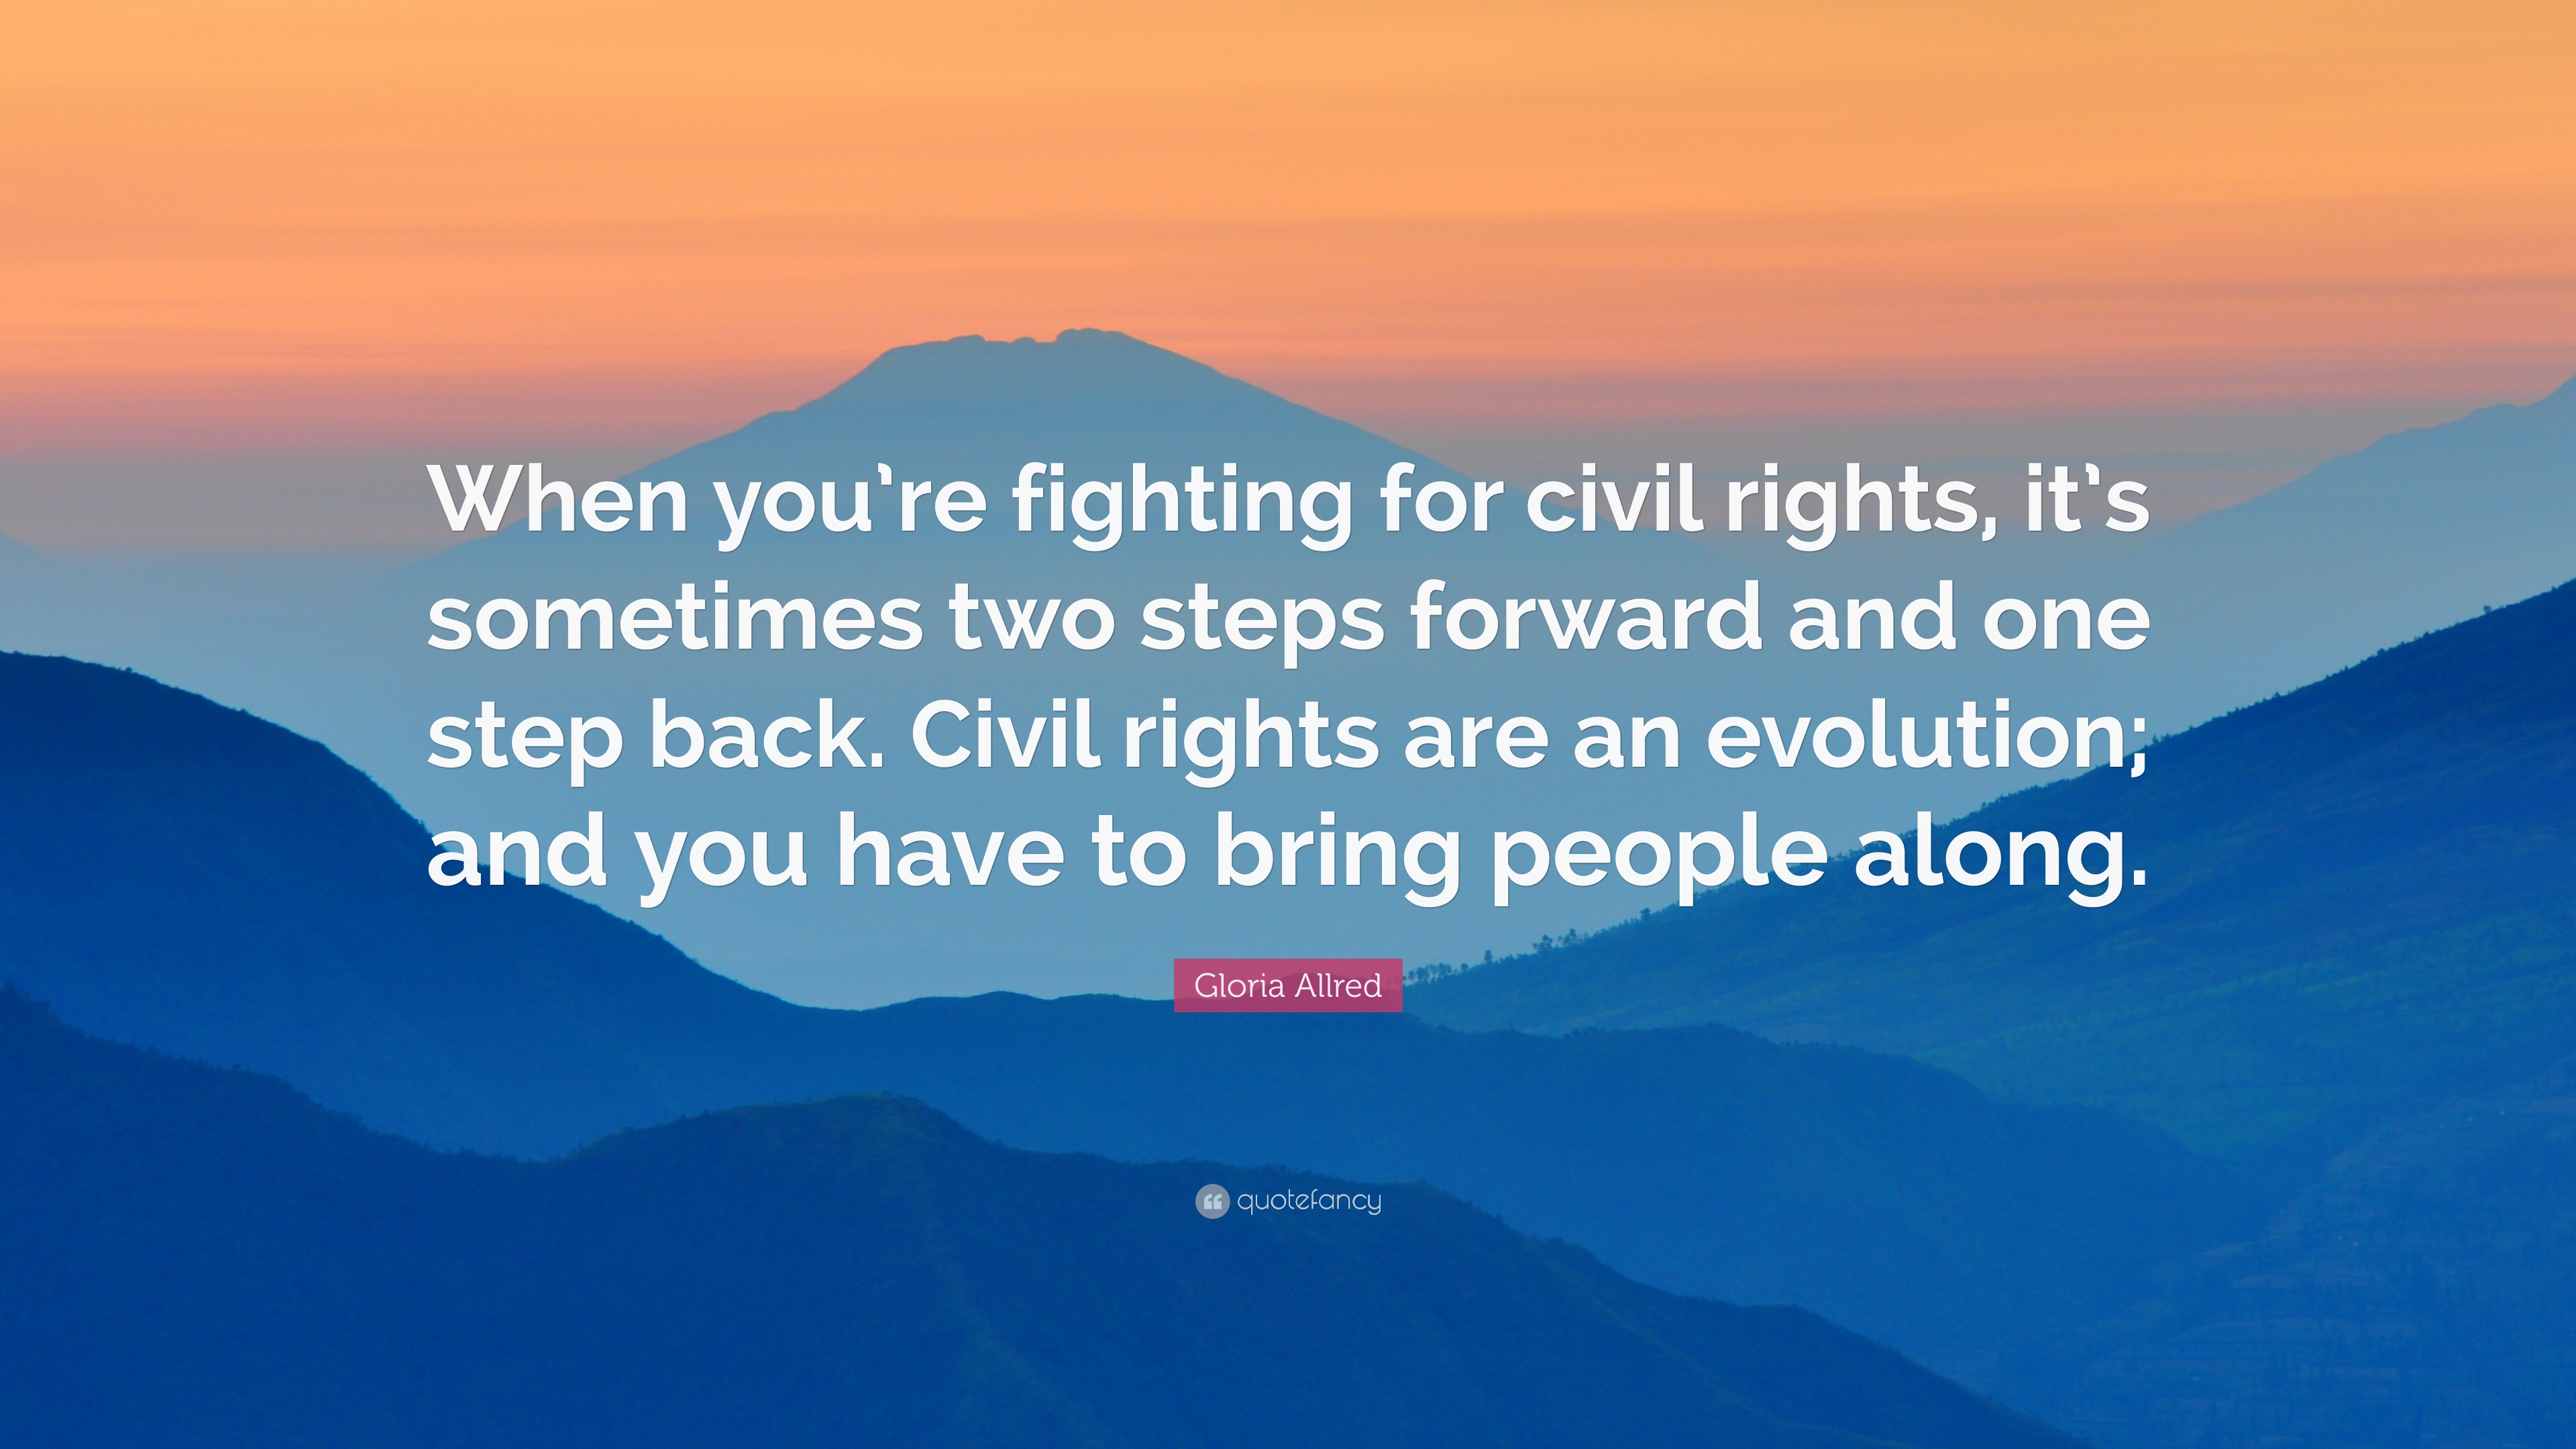 Gloria Allred Quote: “When you're fighting for civil rights, it's sometimes two steps forward and one step back. Civil rights are an evolution.”